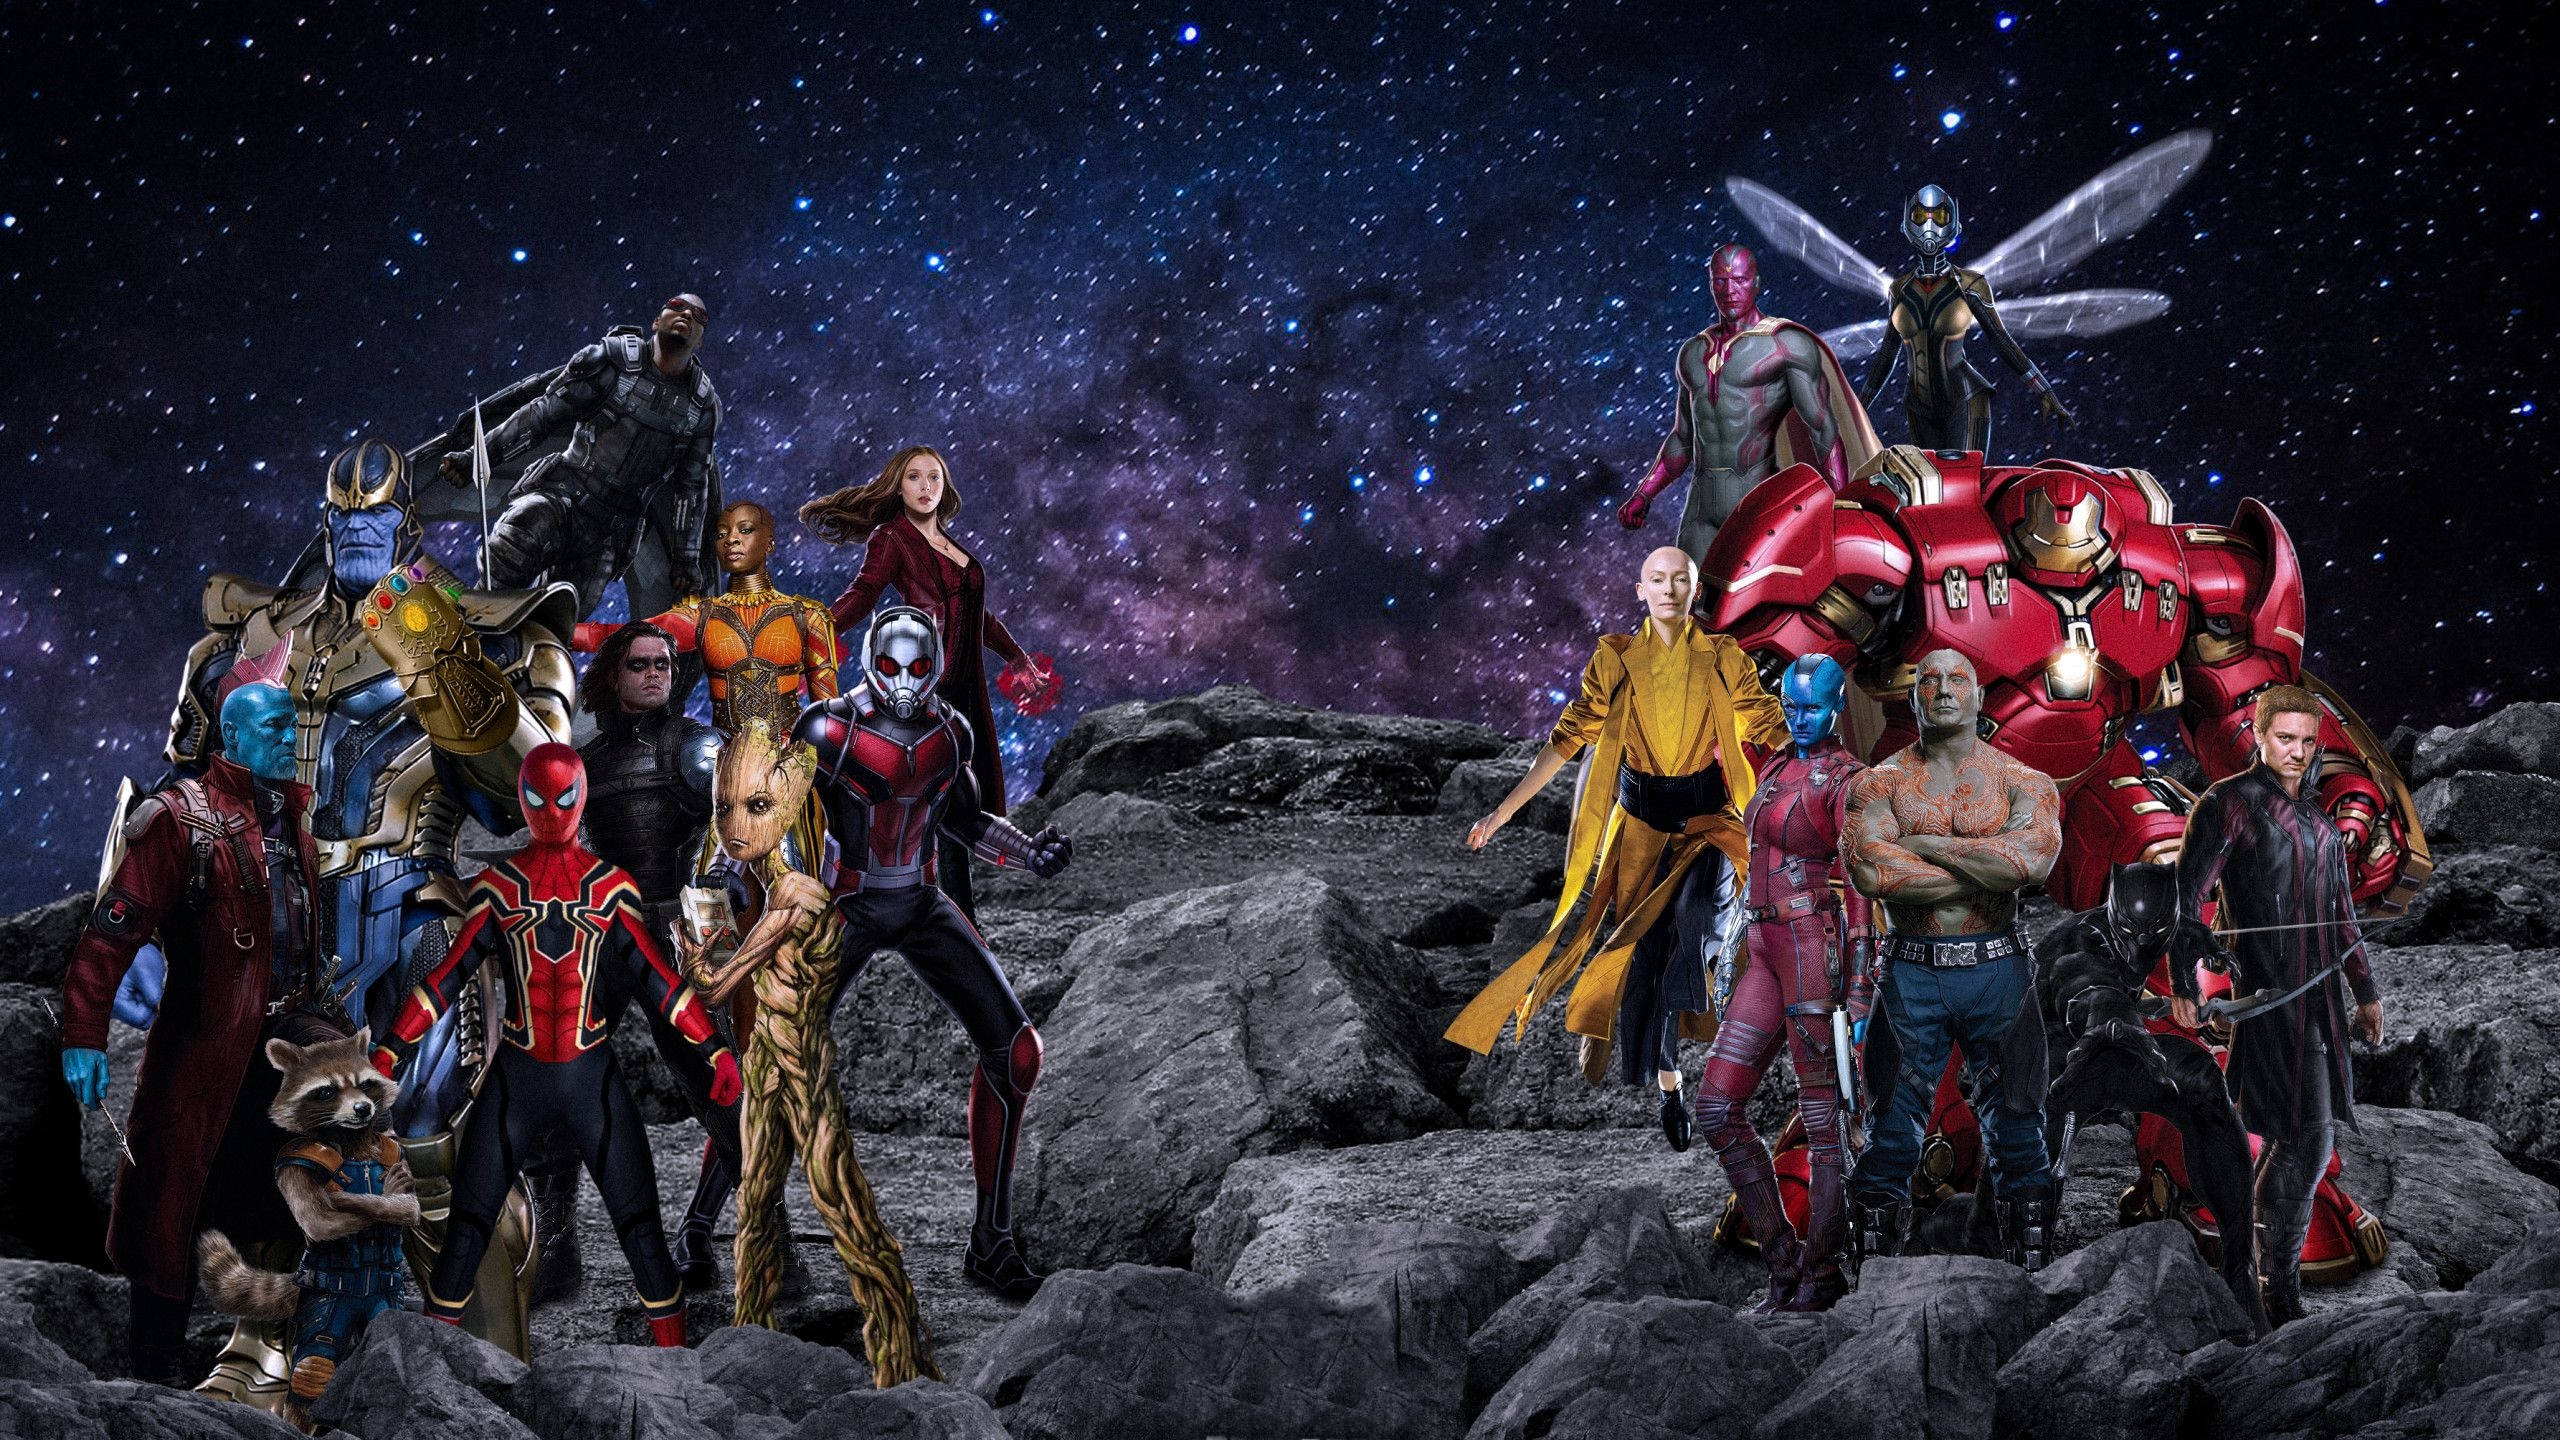 2560x1440 Marvel Heroes On Asteroid Background